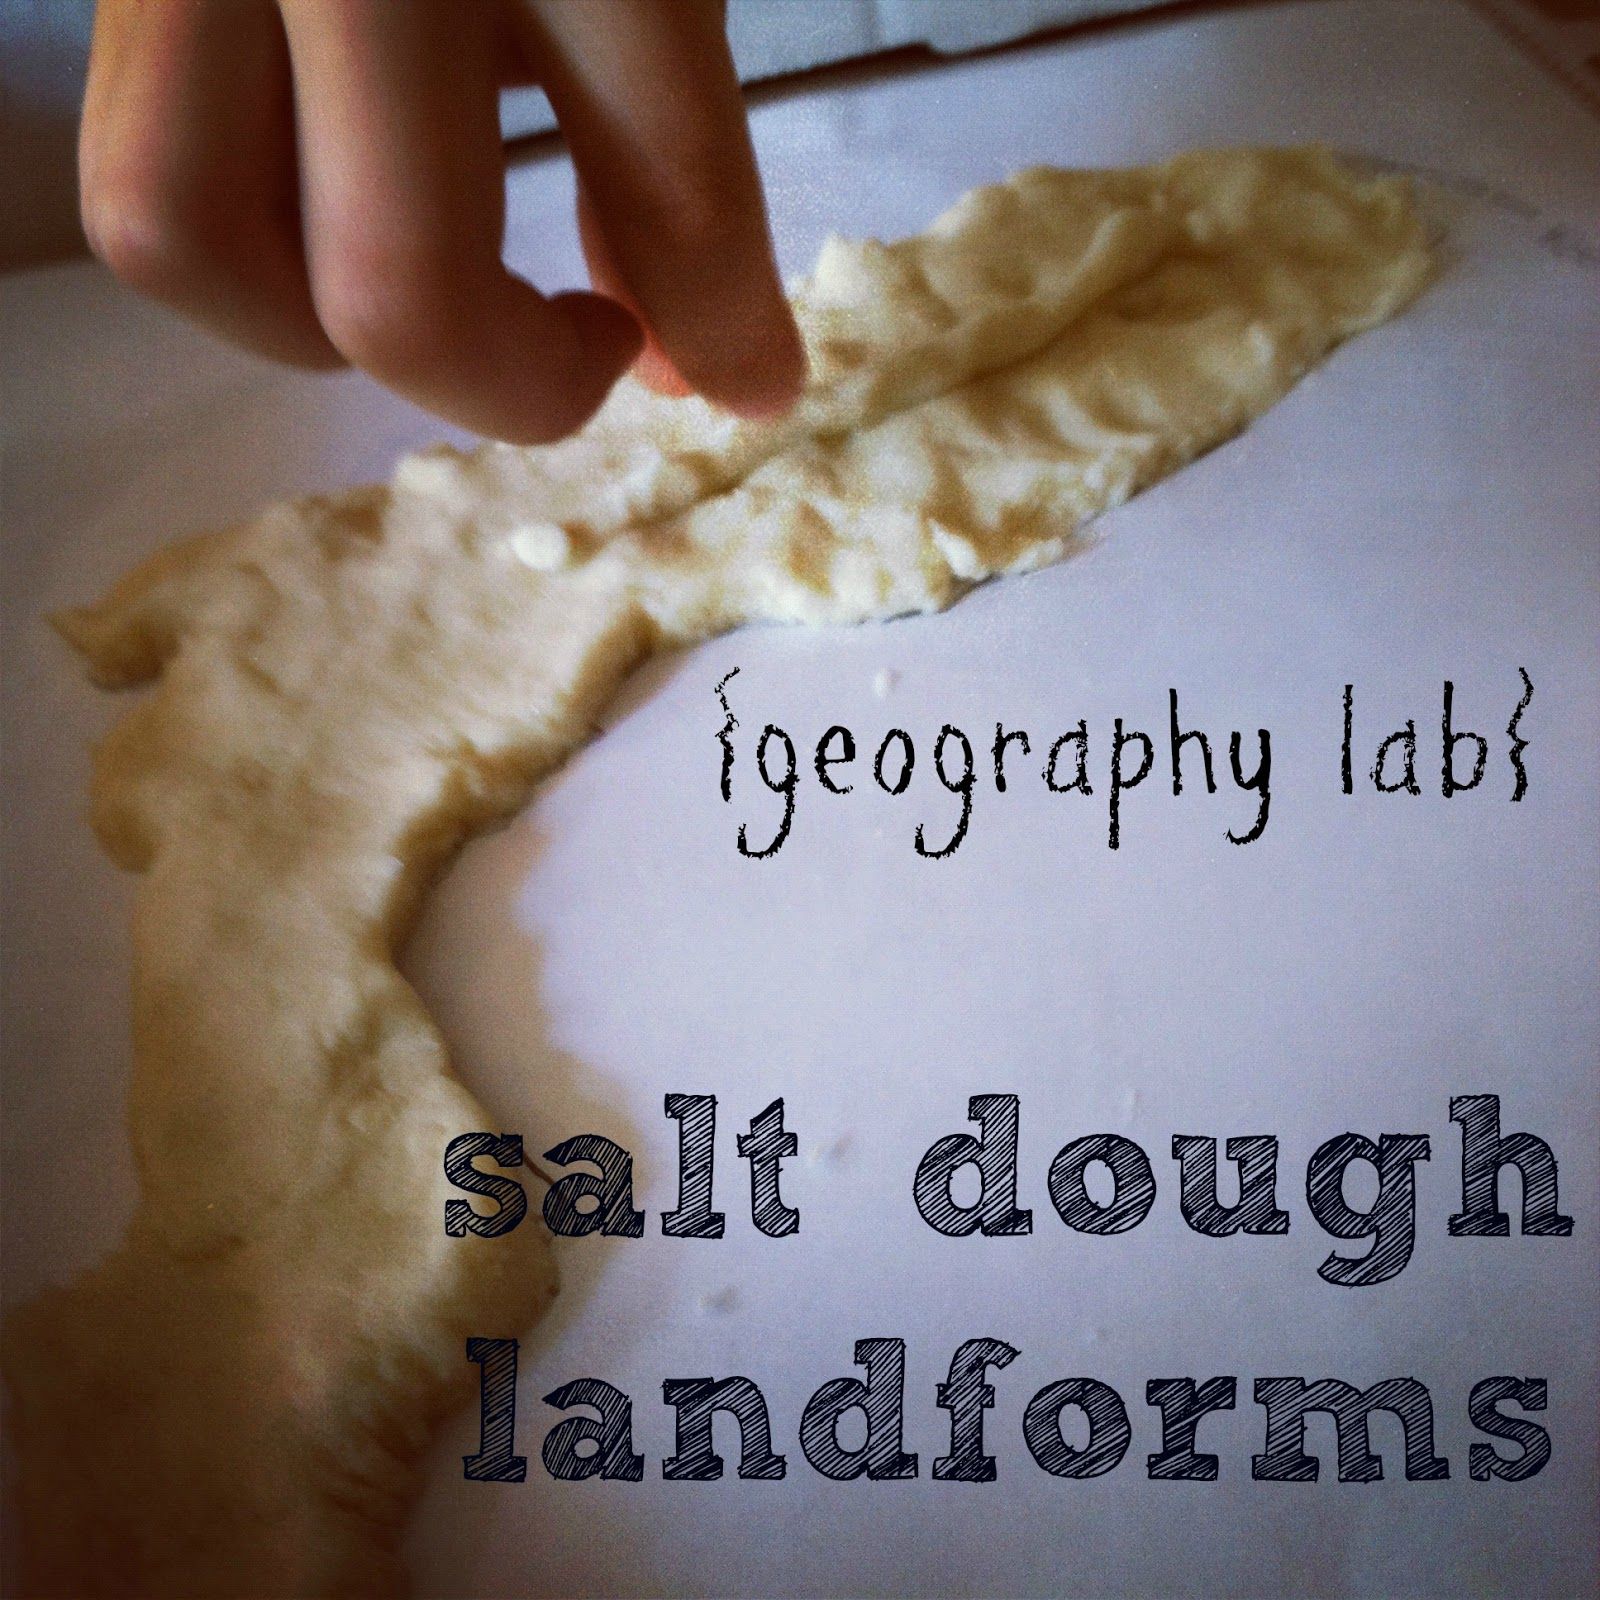 mamascout: {geography lab} salt dough land forms – what an amazing way to learn